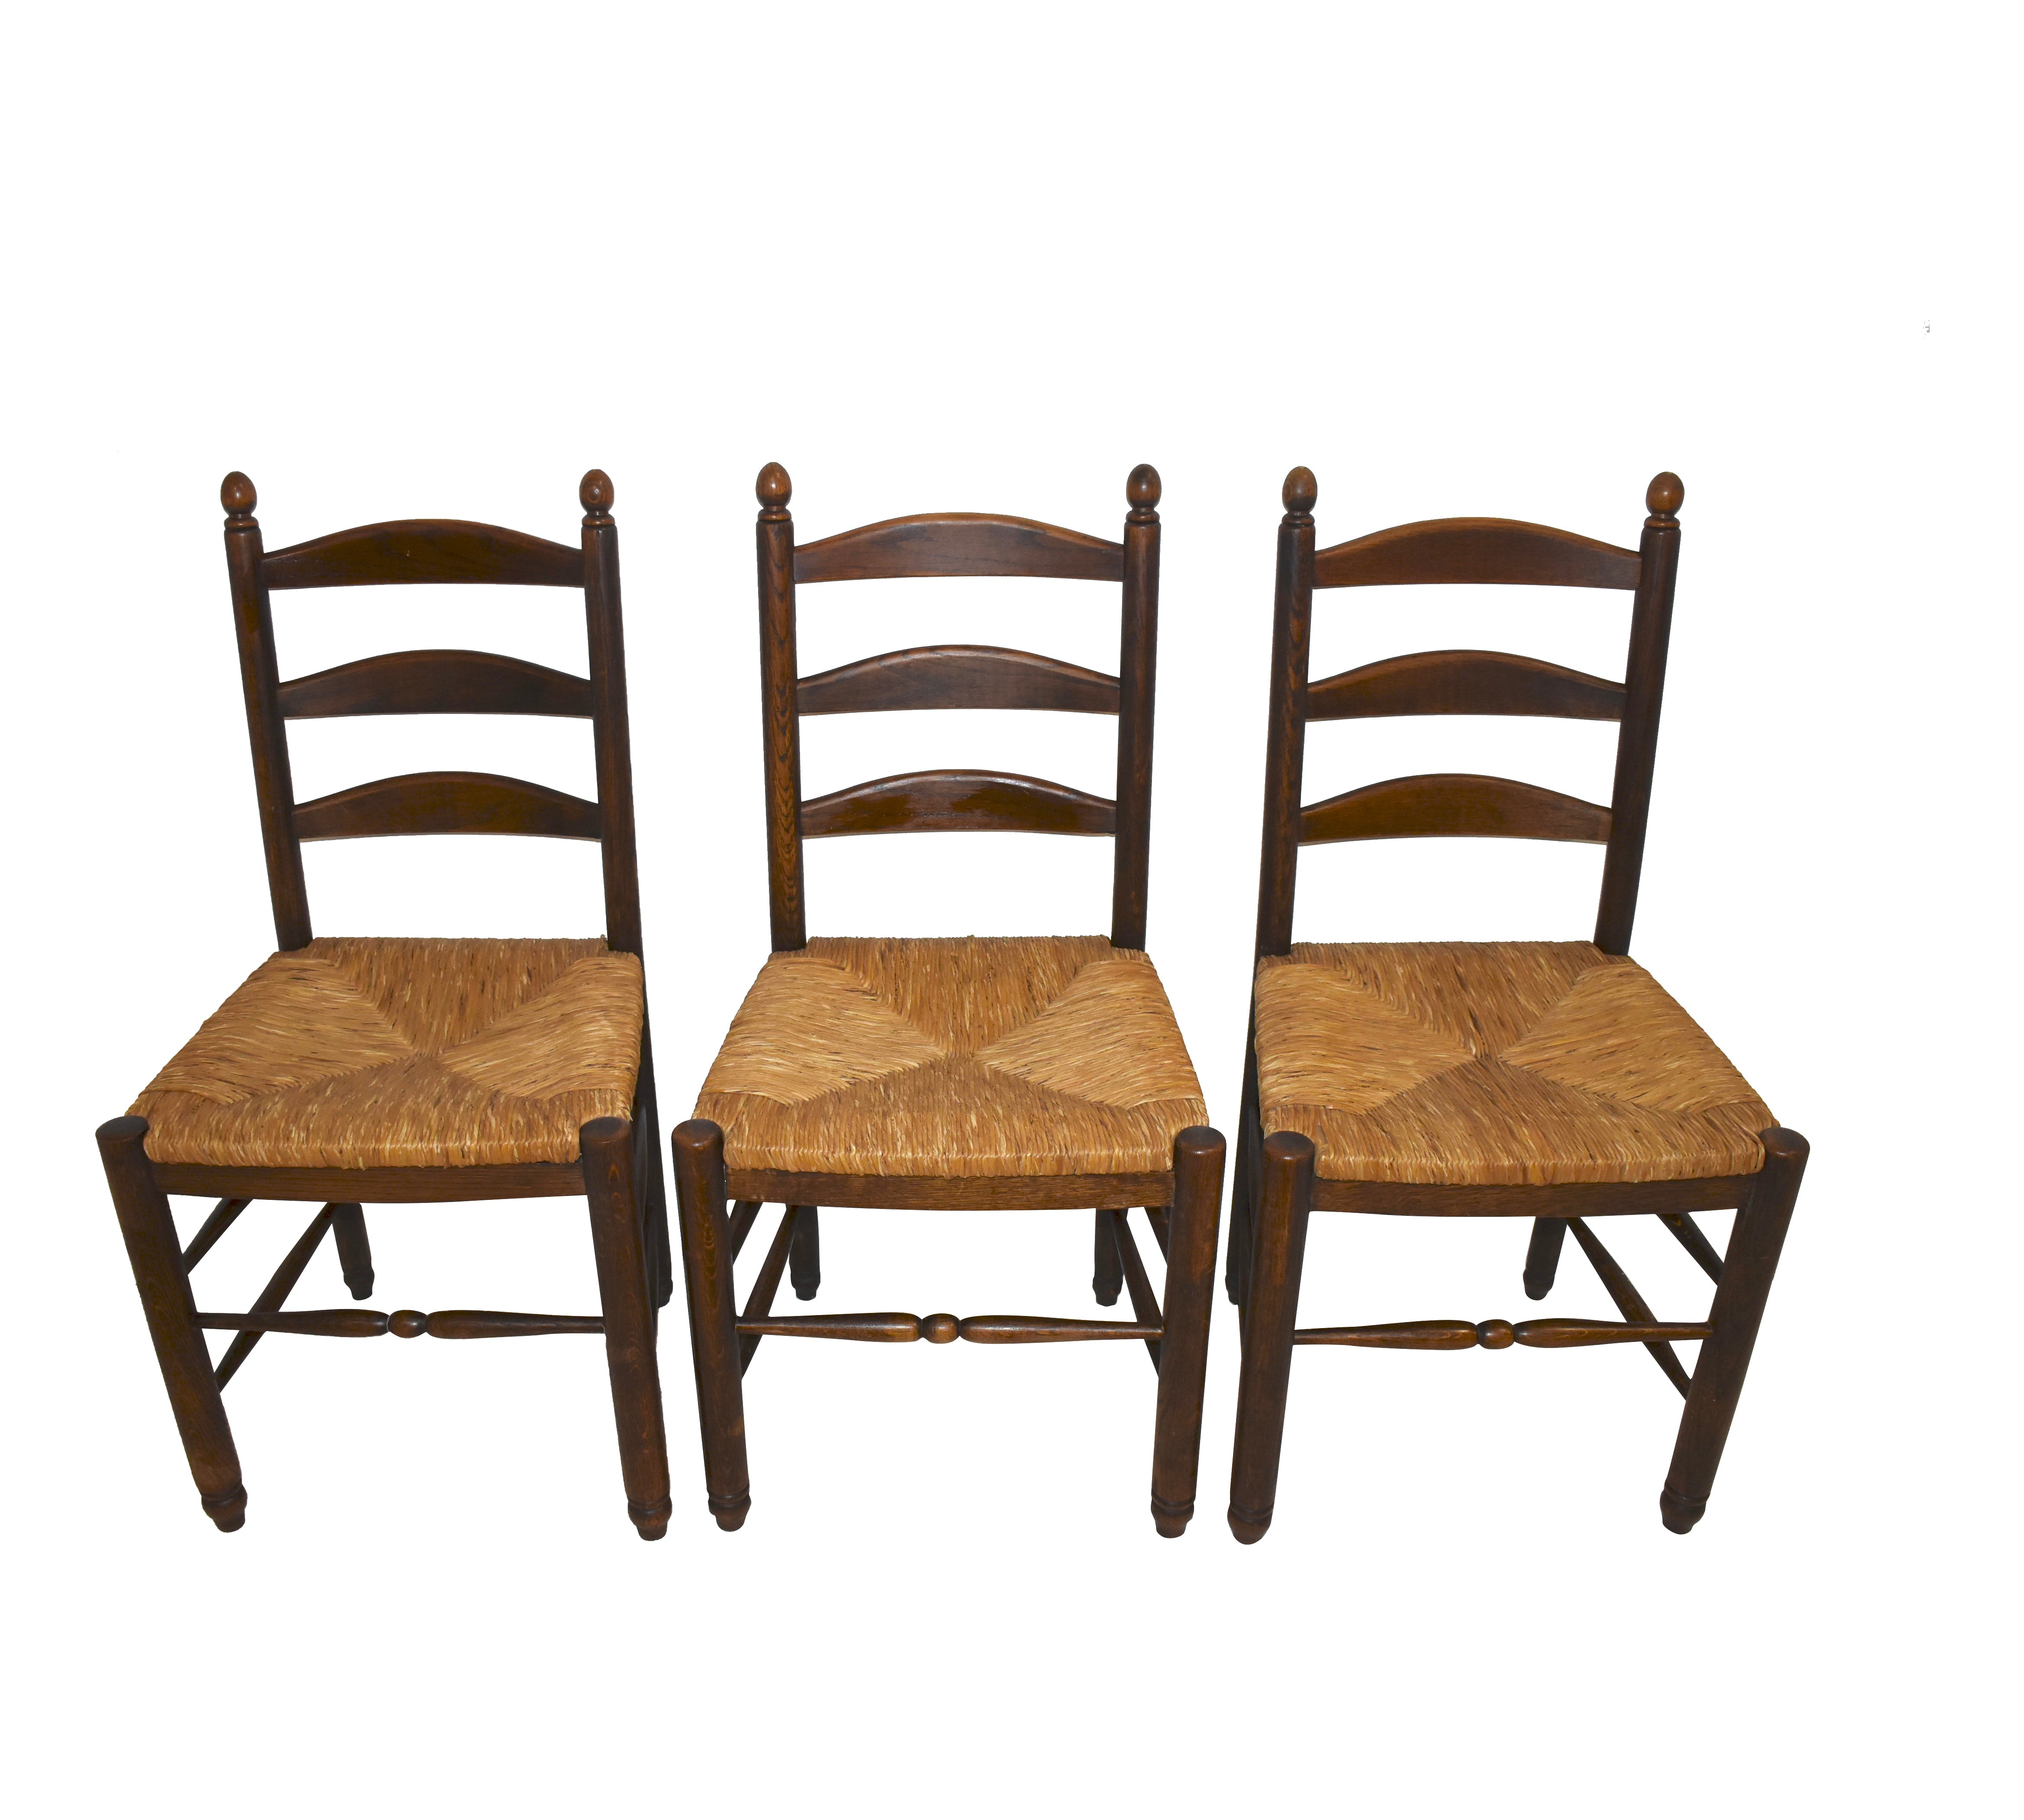 Rustic Farm Table and Ladder Back Chairs